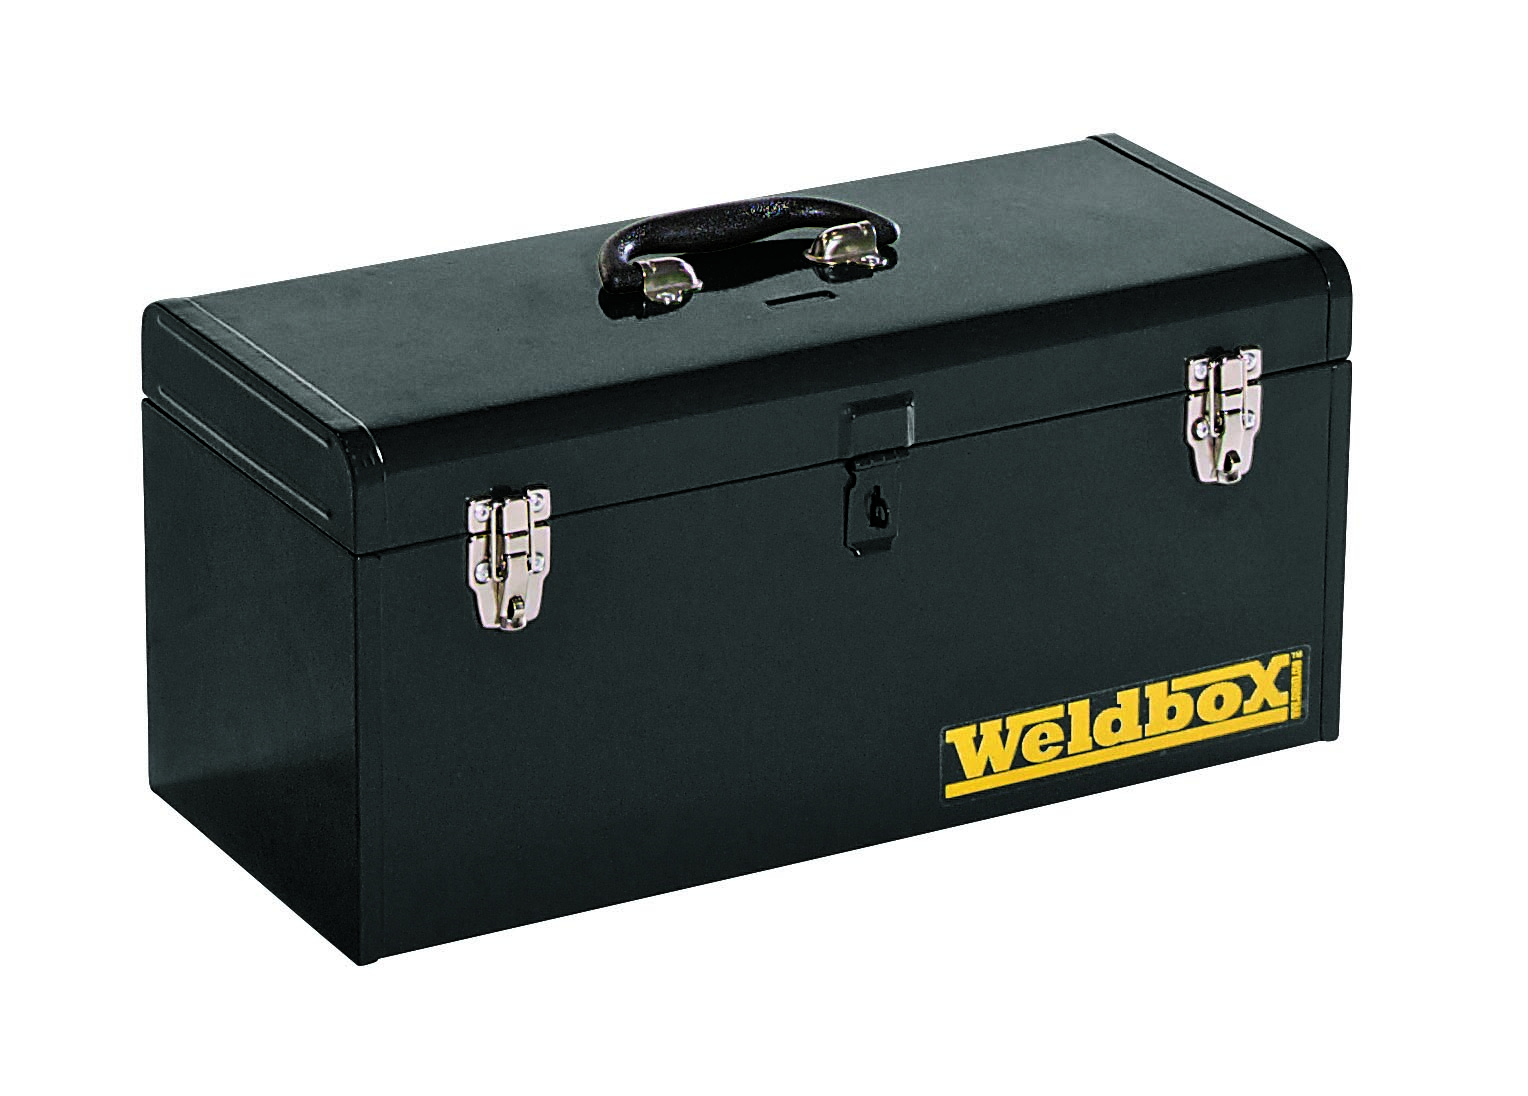 The Weldbox 2008 is a durable, high quality tool box for the shop, truck or job site.